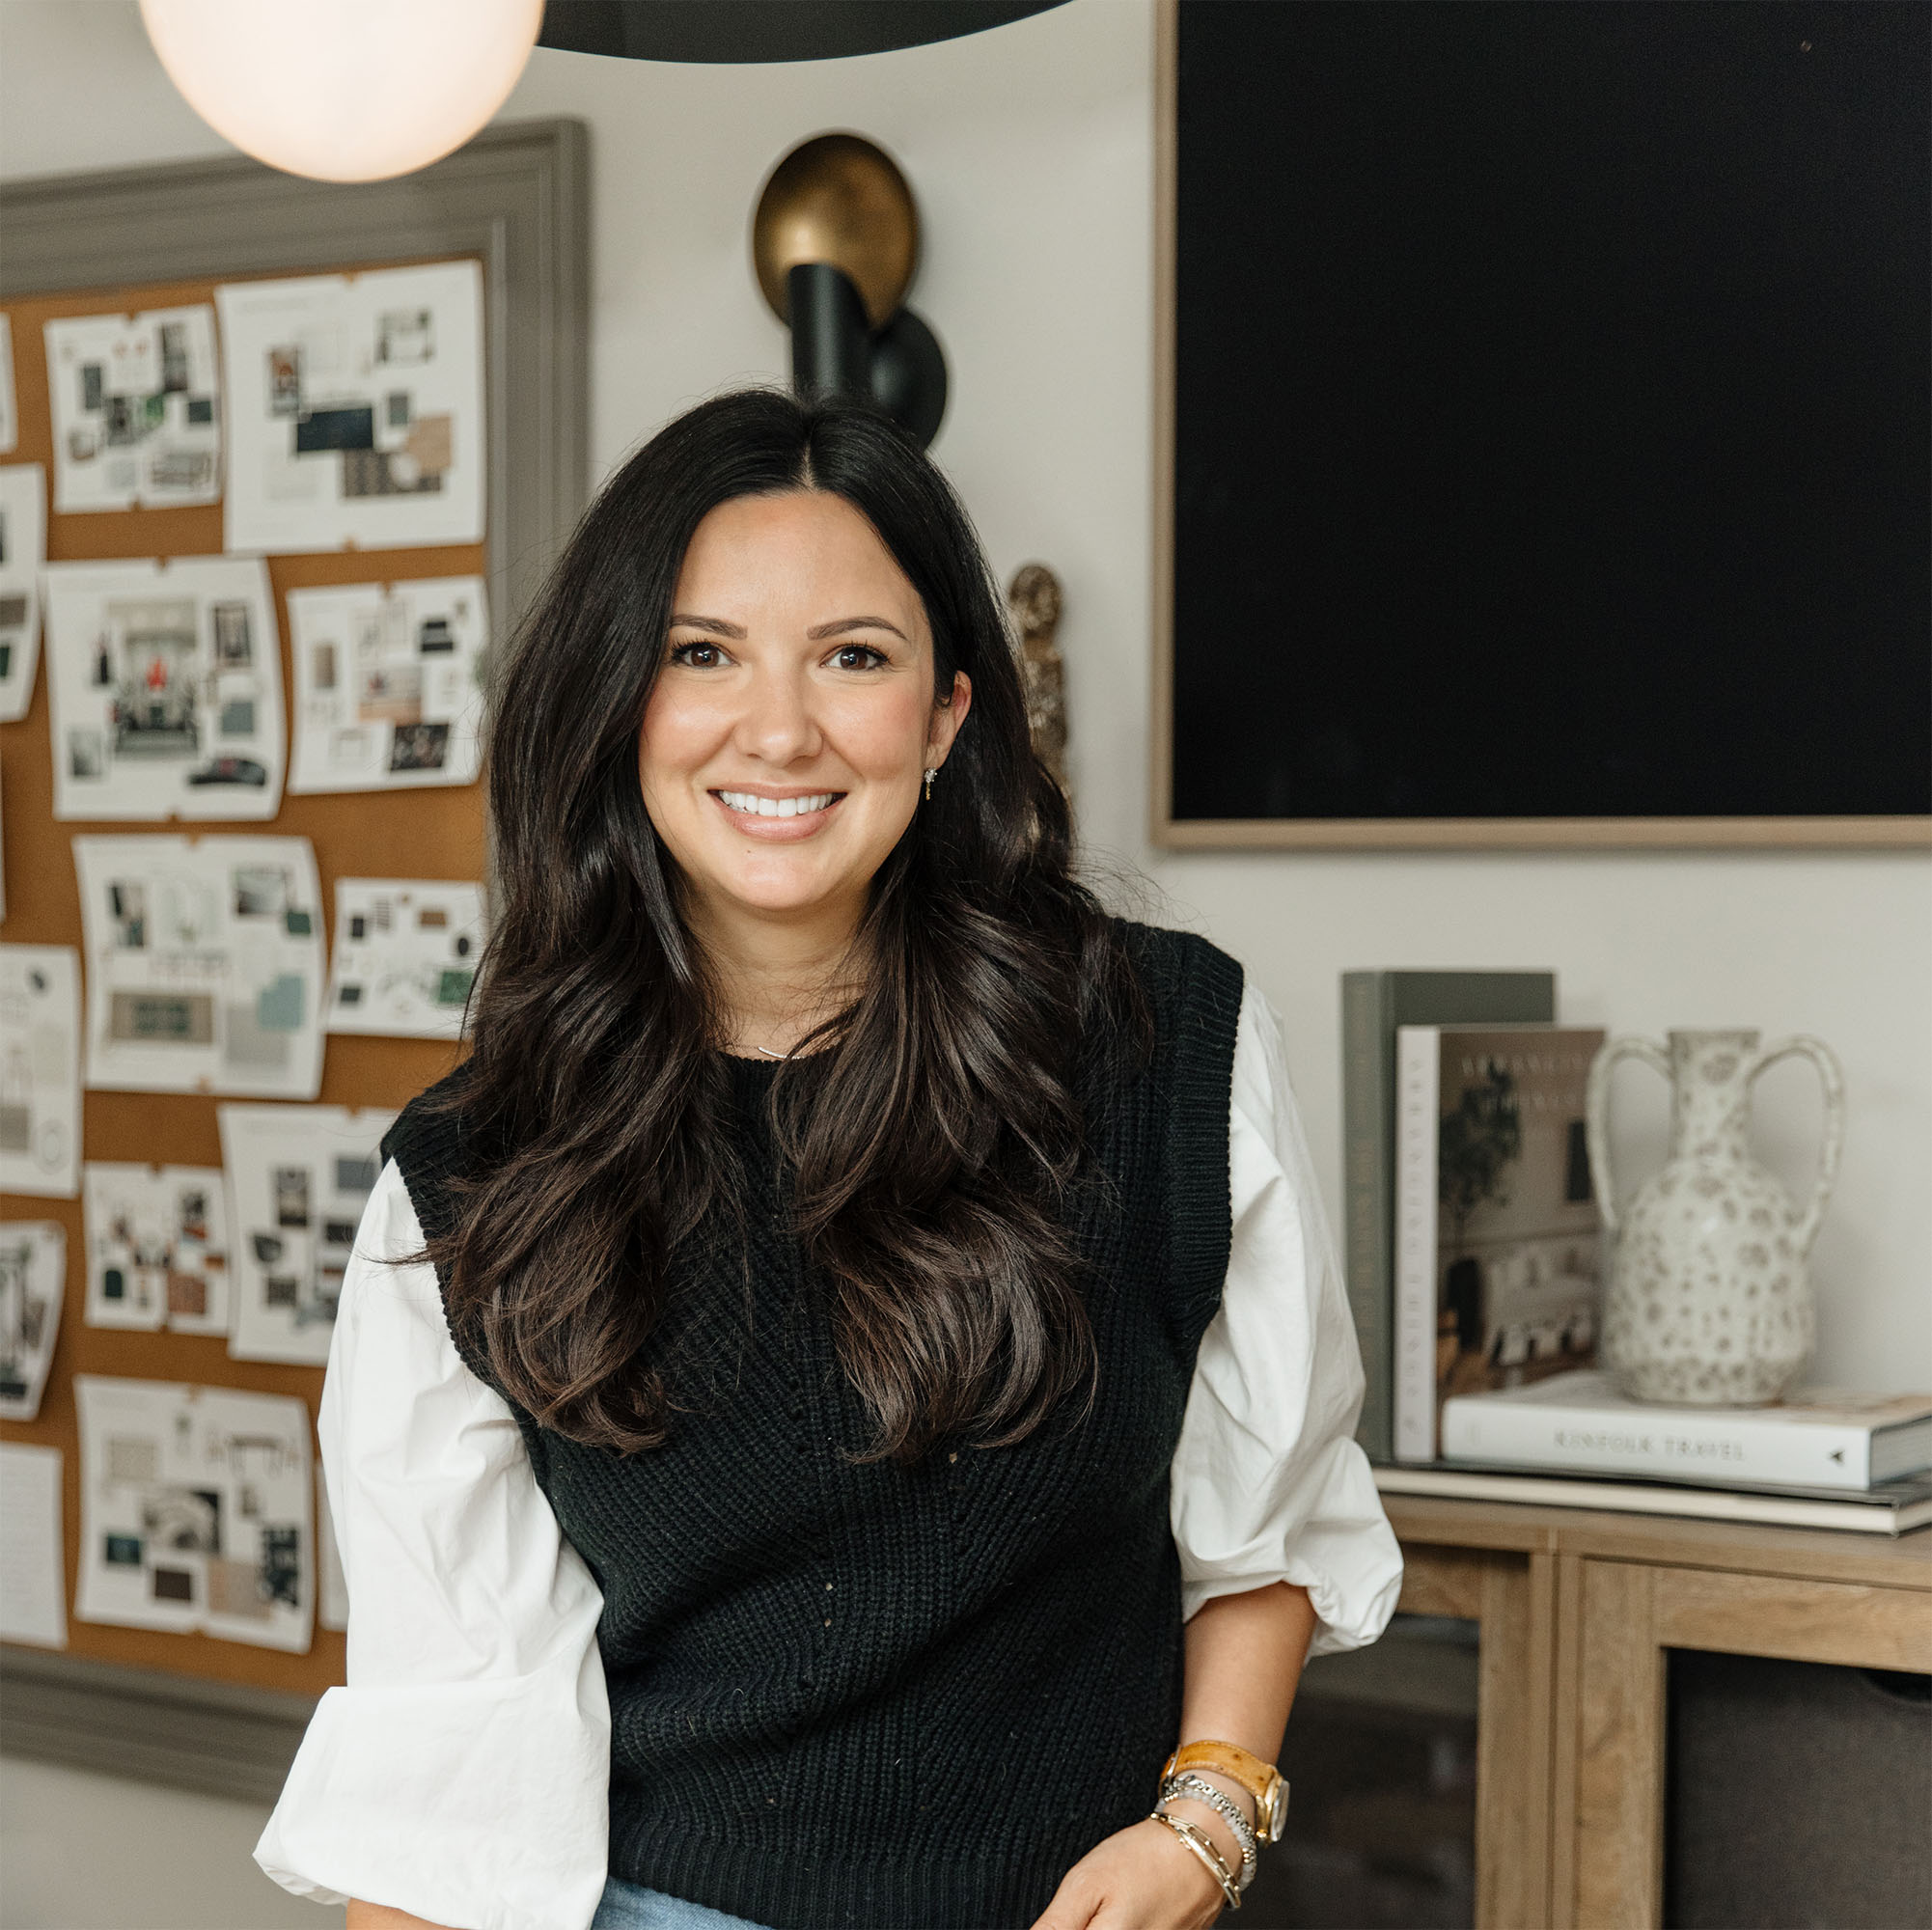 White woman with dark brown hair smiling in home space is Laura Chappetto @ElementDesignNetwork